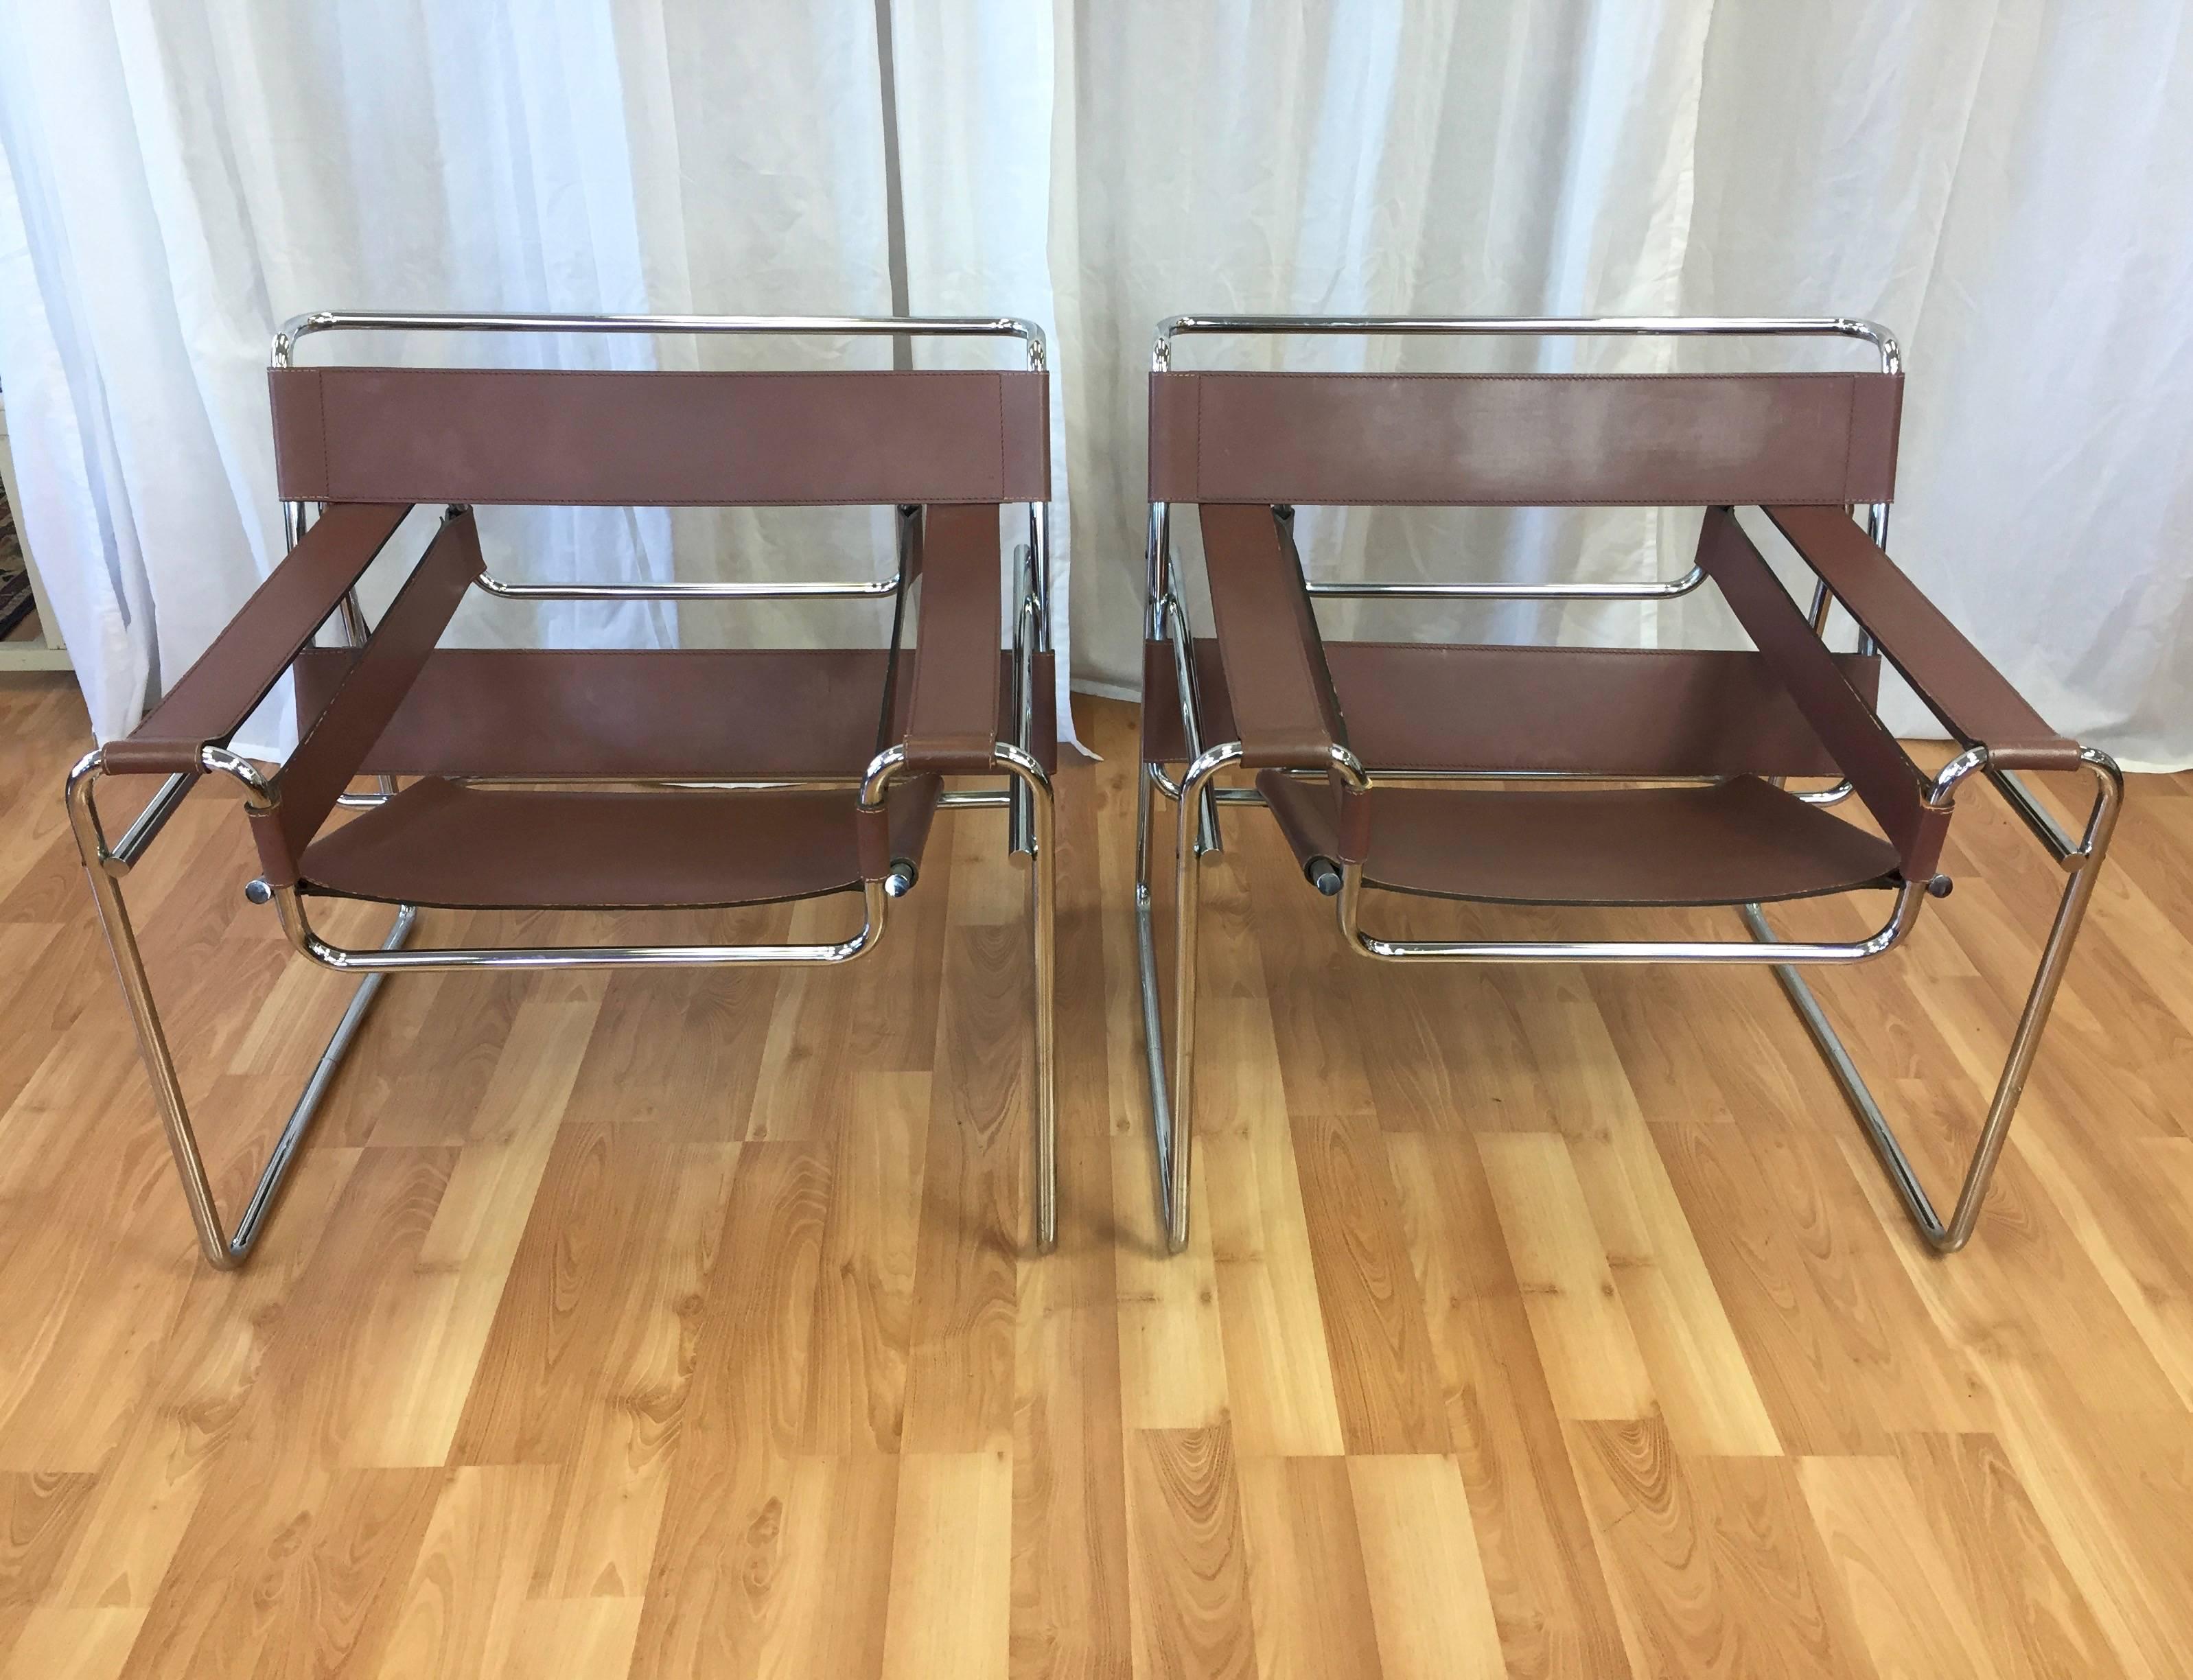 A pair of authentic vintage Model B3 “Wassily” chairs designed by Marcel Breuer and produced by Gavina SpA for Knoll.

An enduring example of Bauhaus luminary Breuer’s revolutionary efforts to reconcile art and industry. Polished seamless tubular